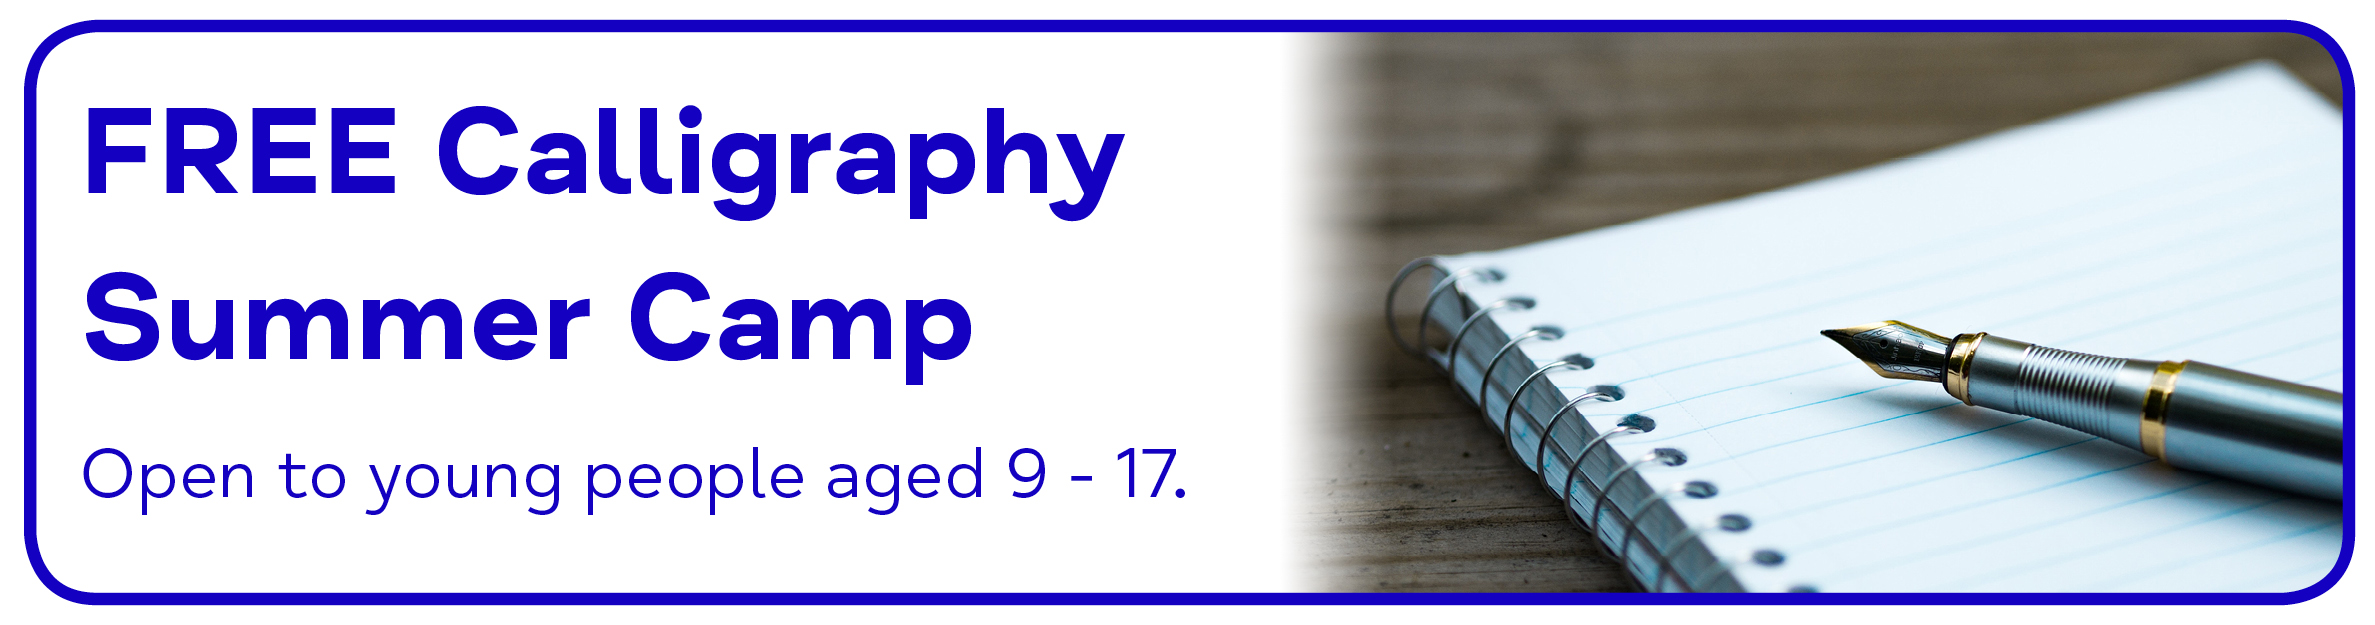 FREE Calligraphy Summer Camp Open to young people aged 9 - 17. 